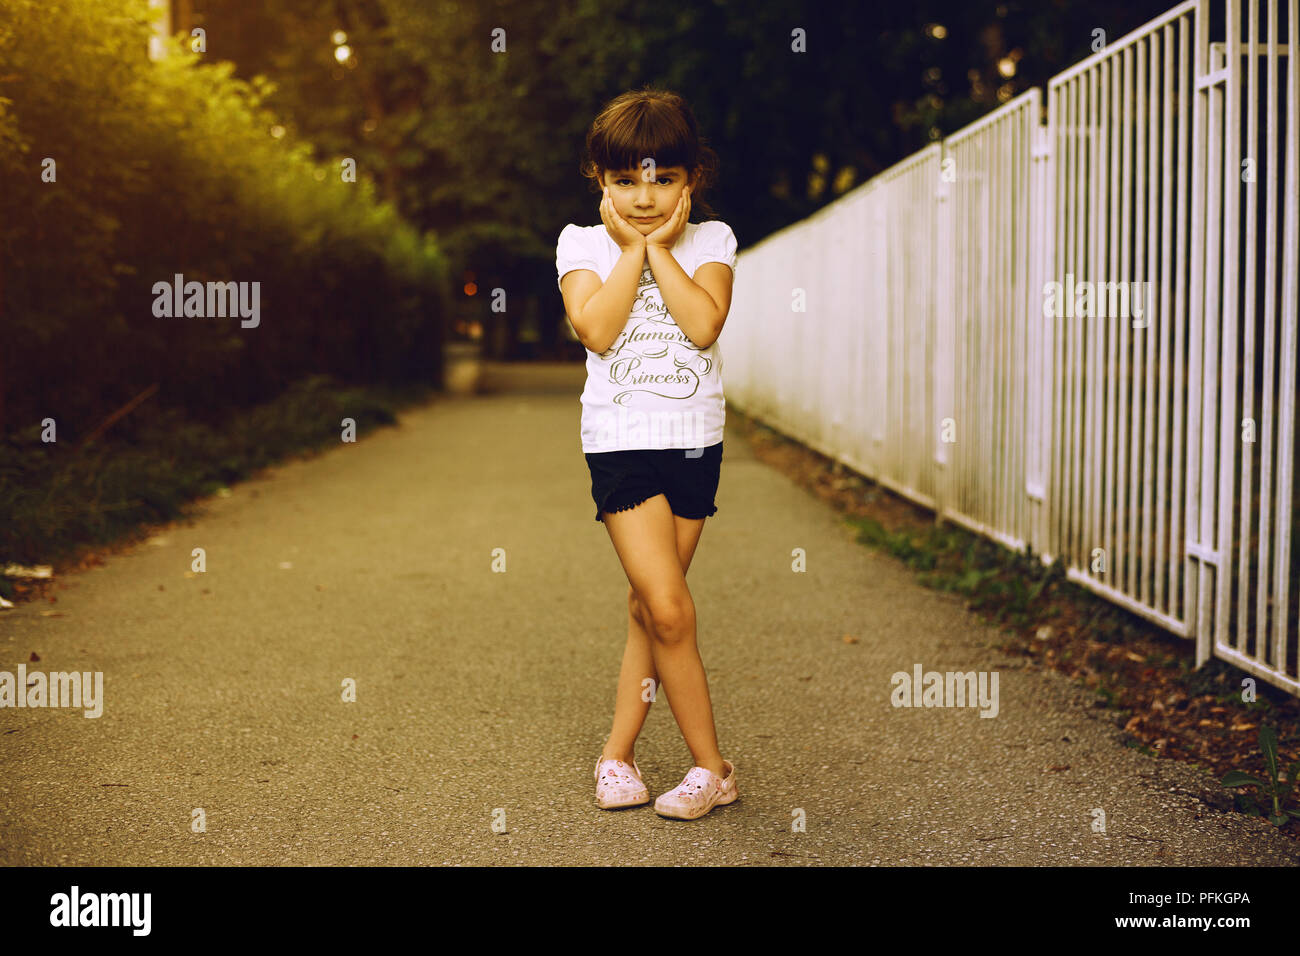 7 Simple posing tips to help you look good in photos — Zest Photography